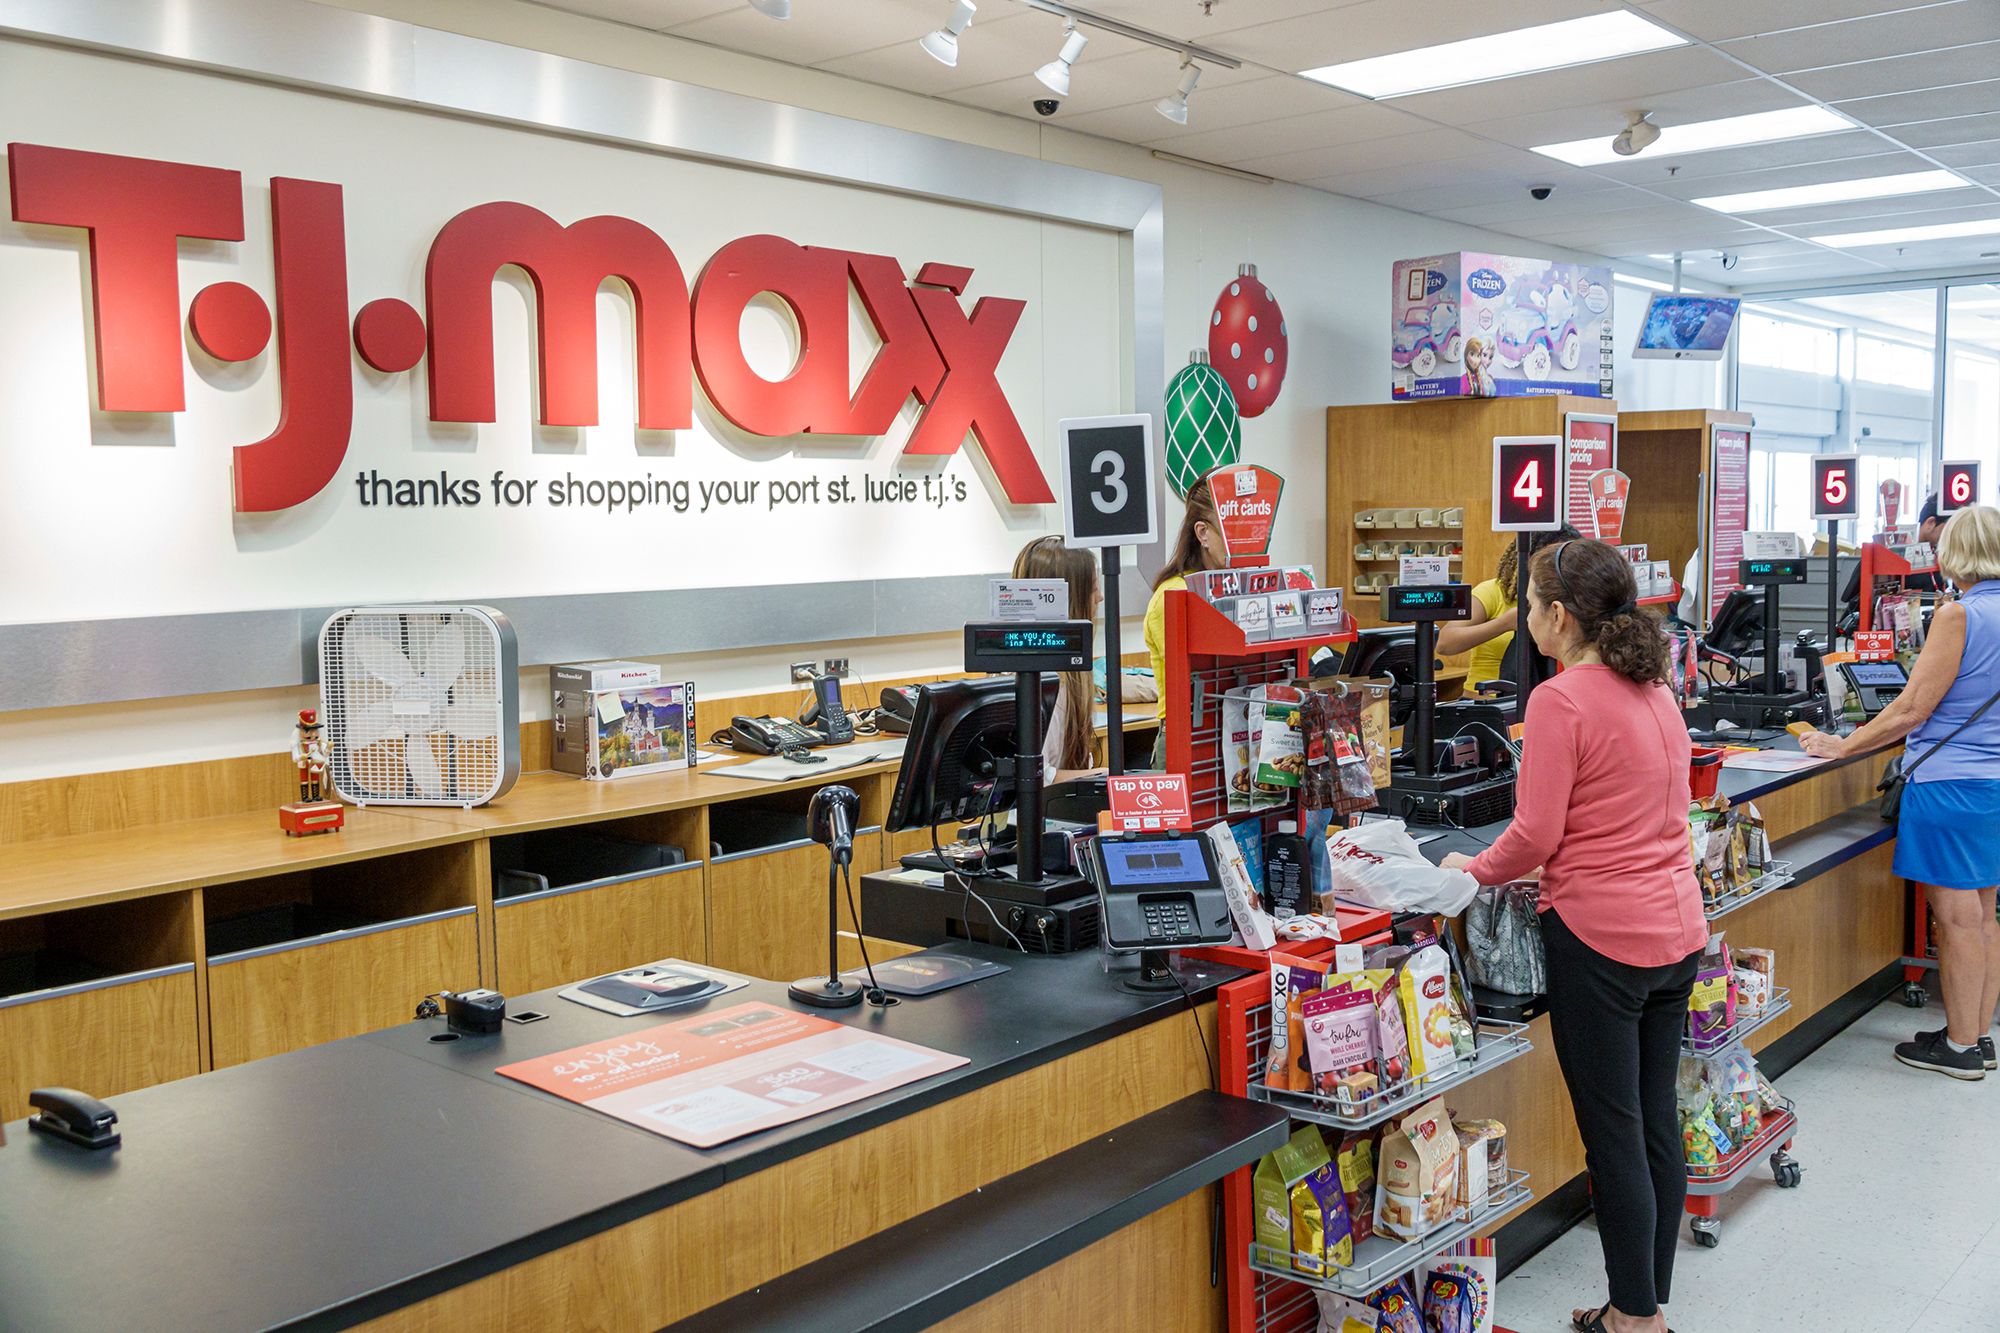 T.J. Maxx owner beats sales estimates as customers return to stores